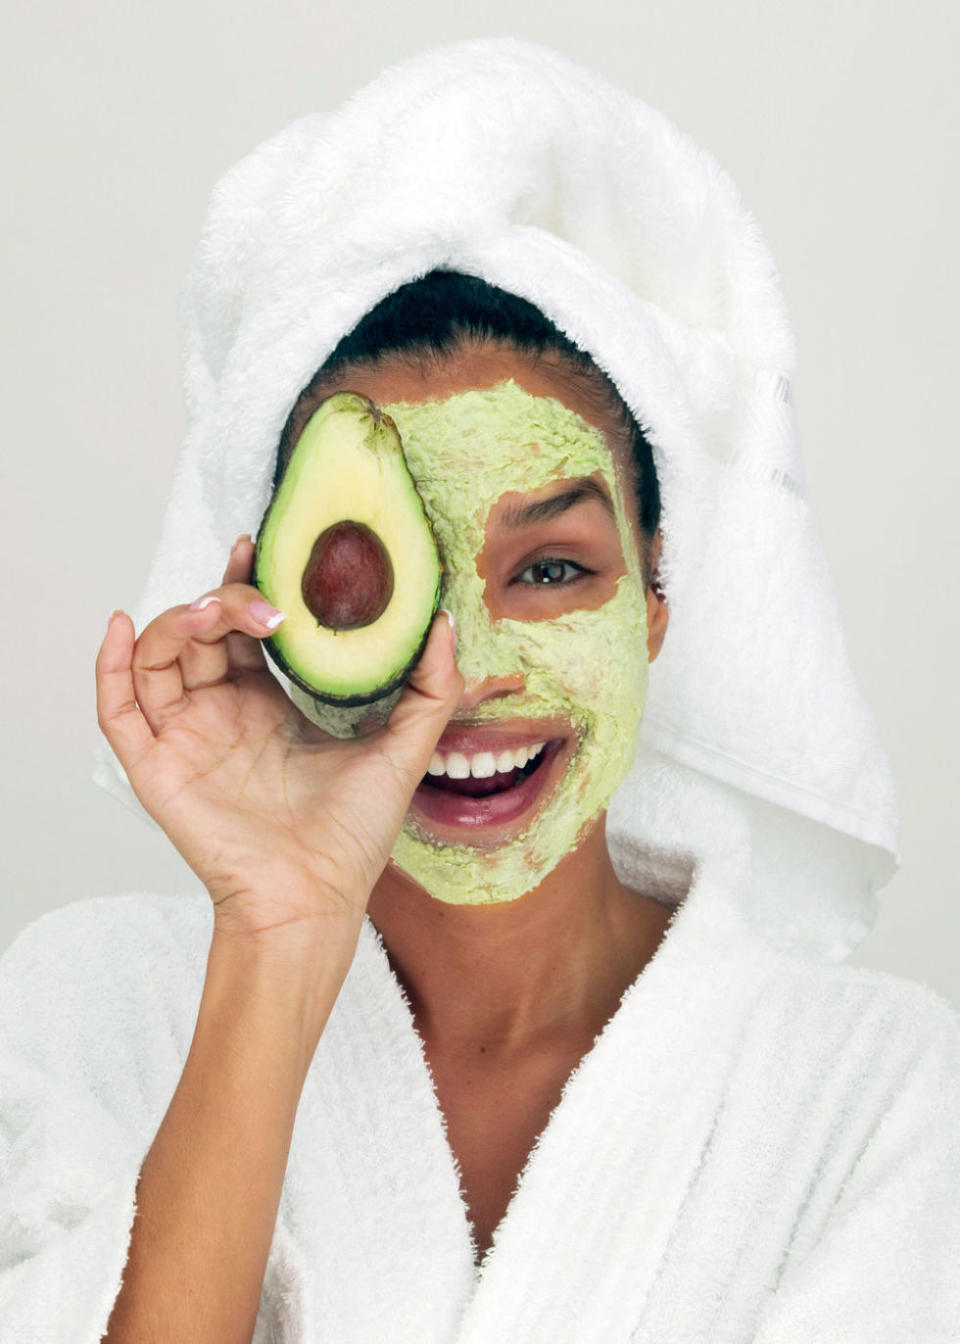 Perk up eyes instantly with a mask